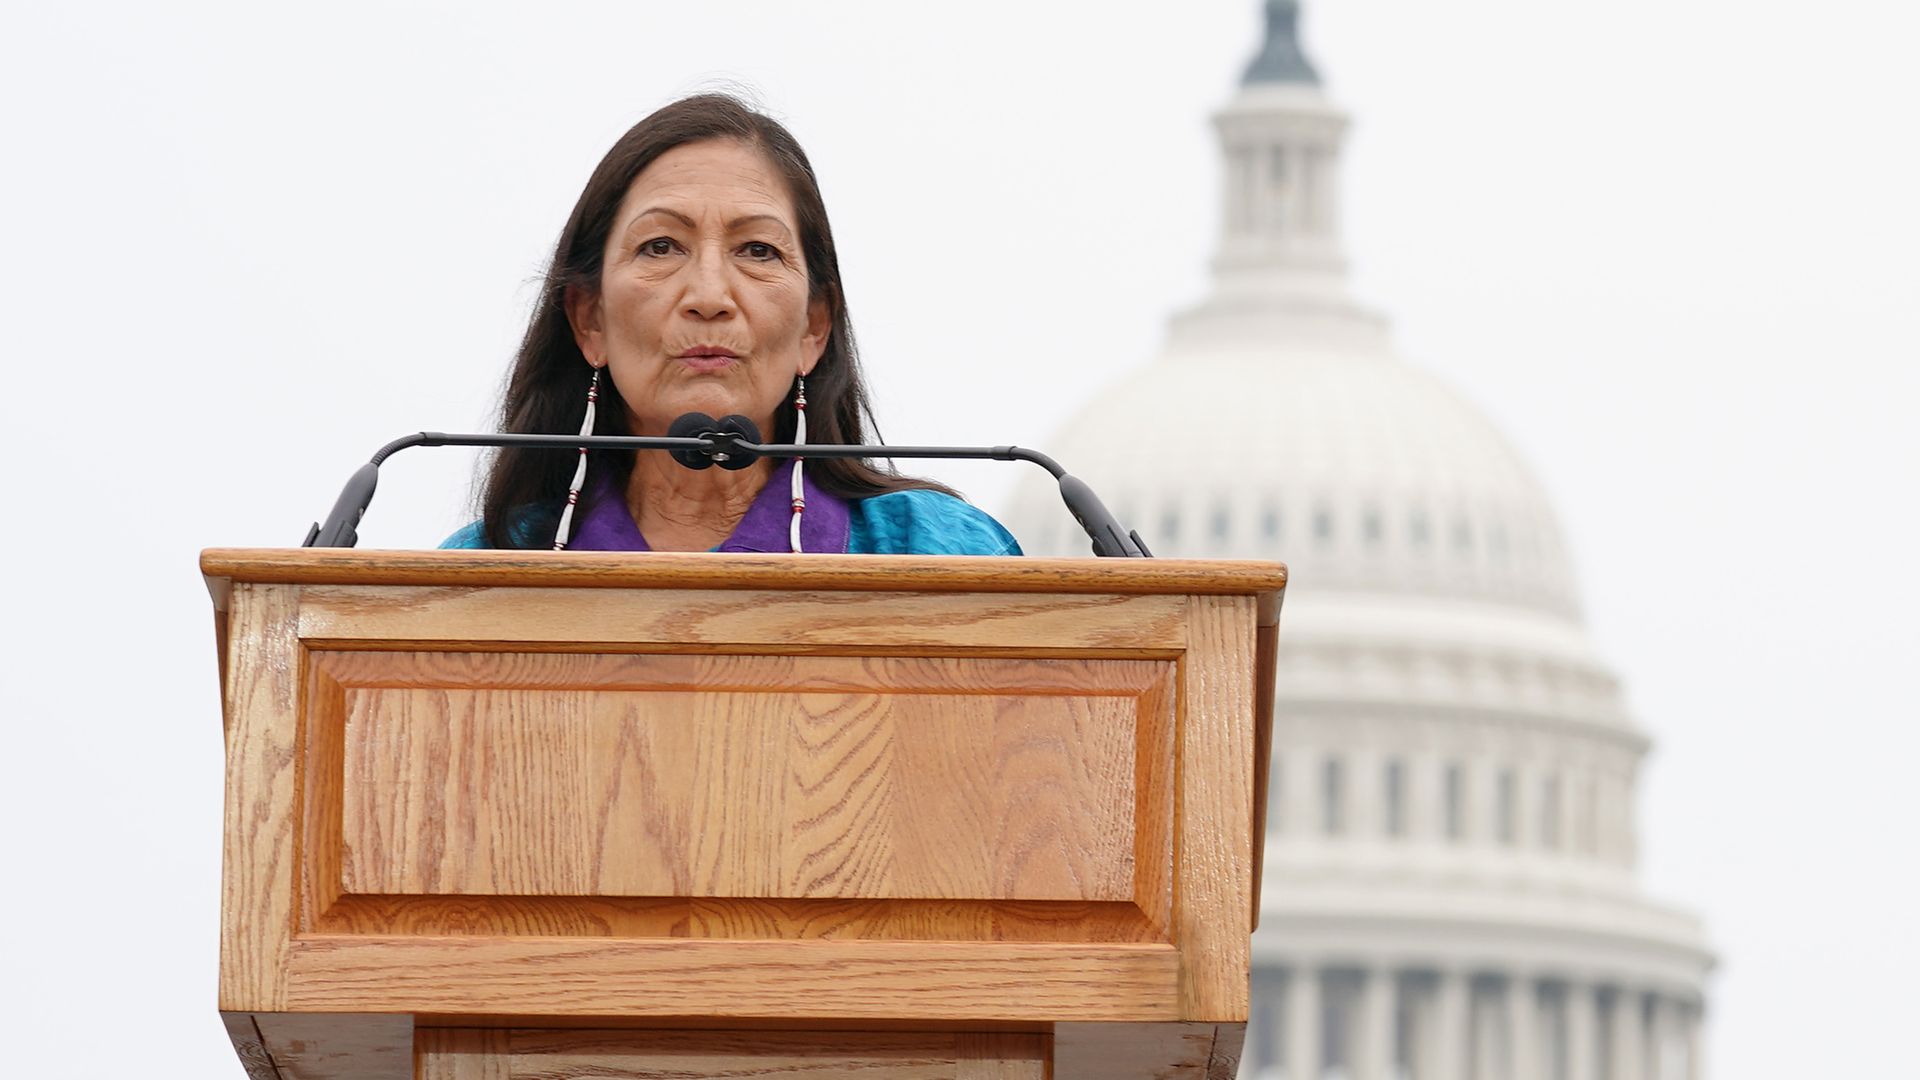 Photo of Deb Haaland speaking from a podium in front of the U.S. Capitol